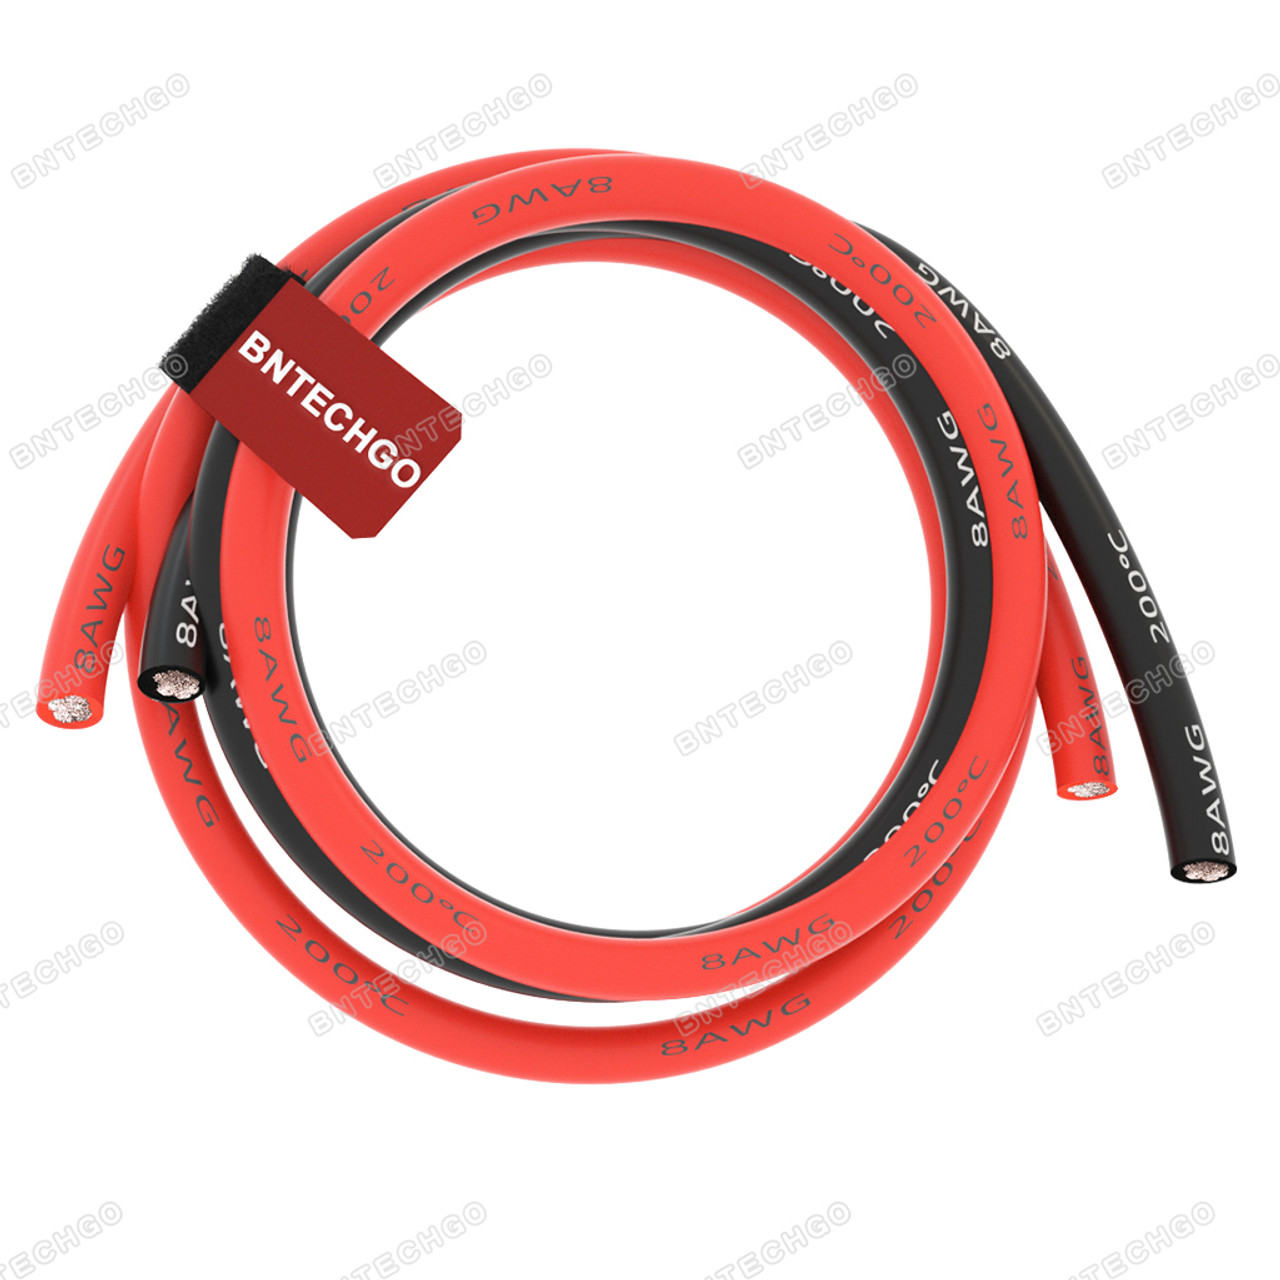 BNTECHGO 10 Gauge Silicone Wire Ultra Flexible 6 Feet(Black and Red Each  Color 3 ft) High Temp 200 deg C 600V 10 AWG Stranded Tinned Copper Wire